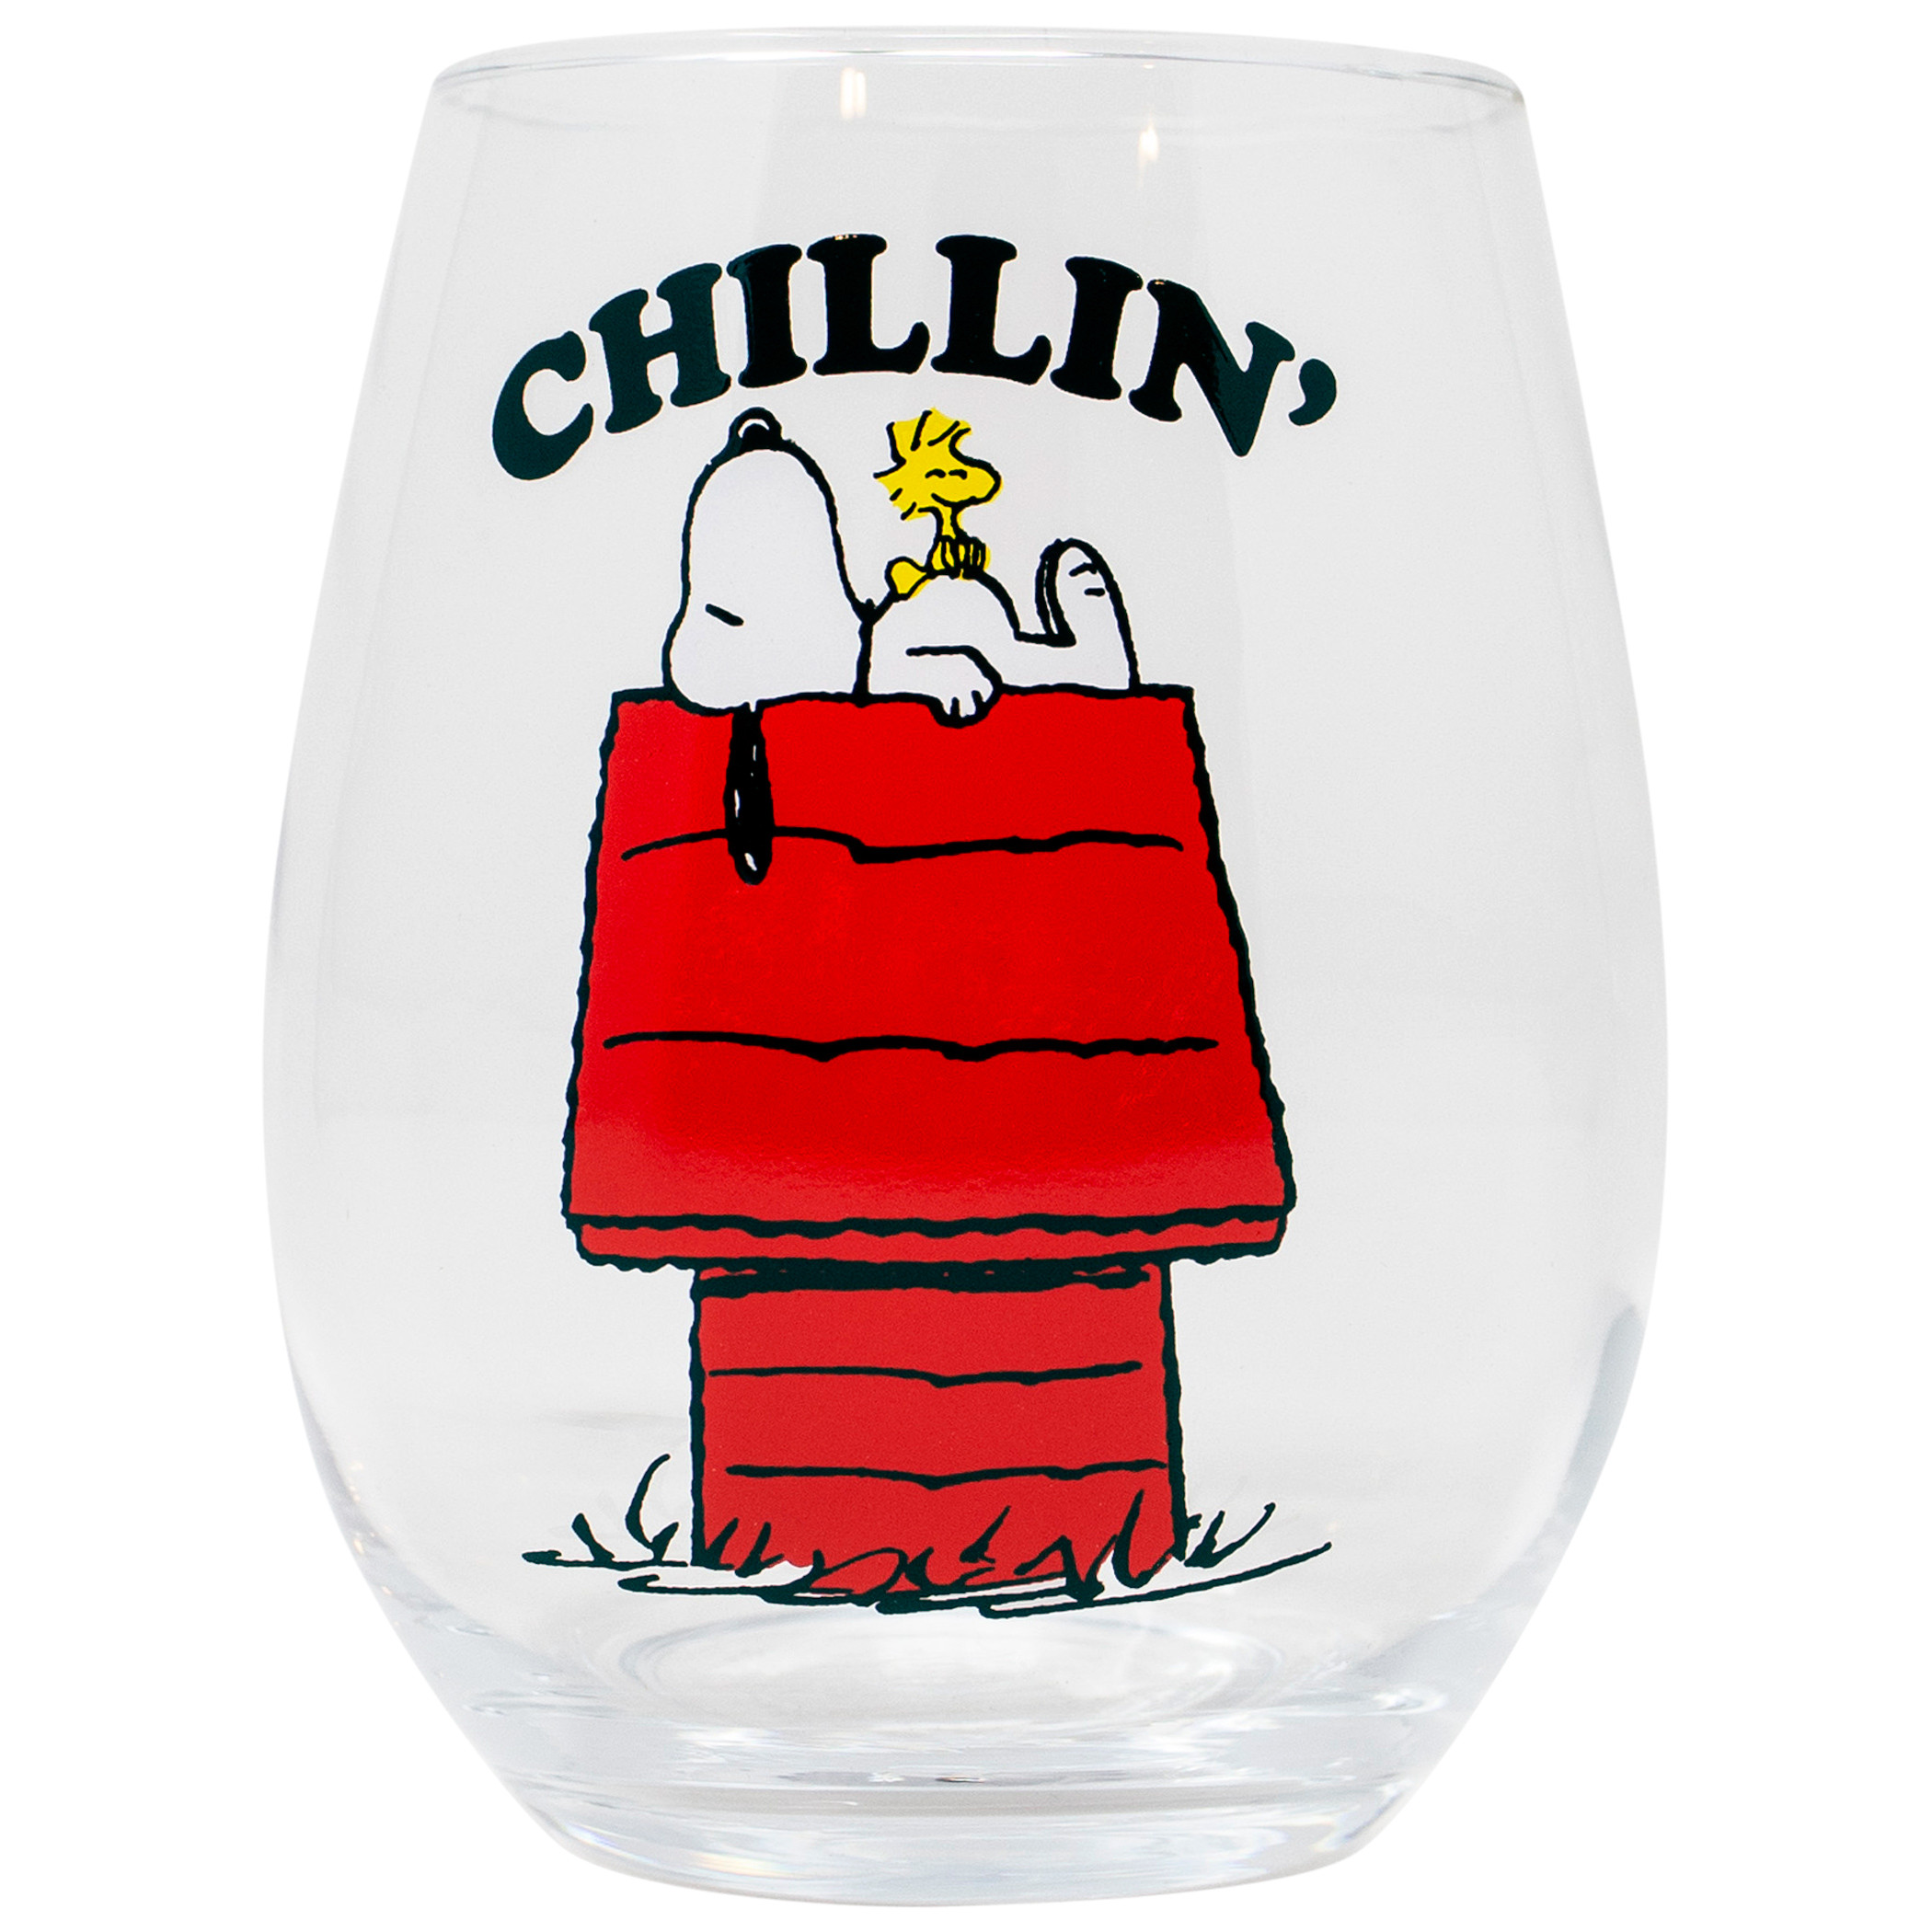 Peanuts Snoopy Chillin 20 Ounce Stemless Wine Glass